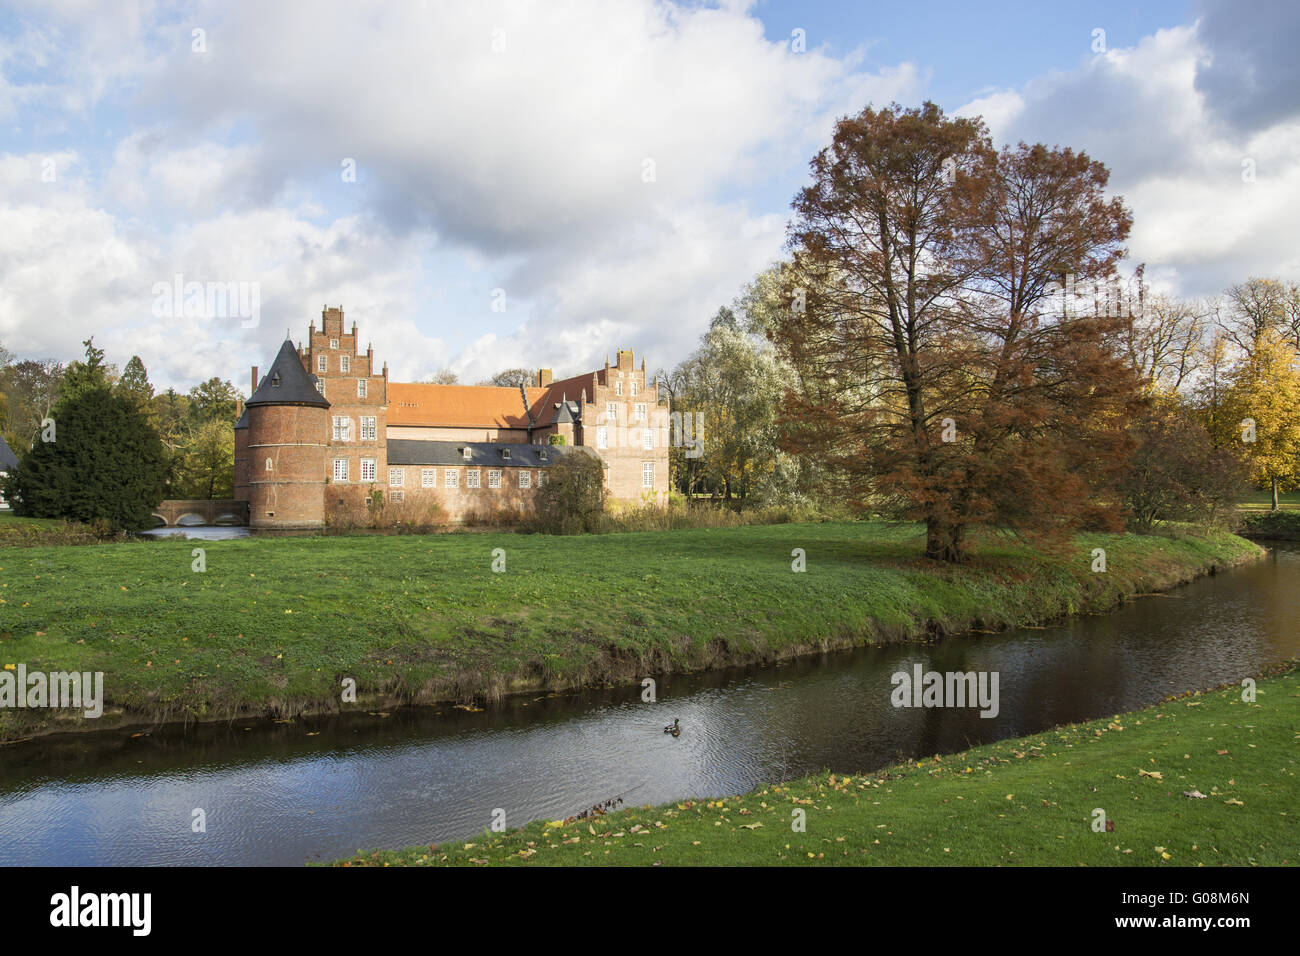 Autumnally atmosphere on the moated castle in Hert Stock Photo